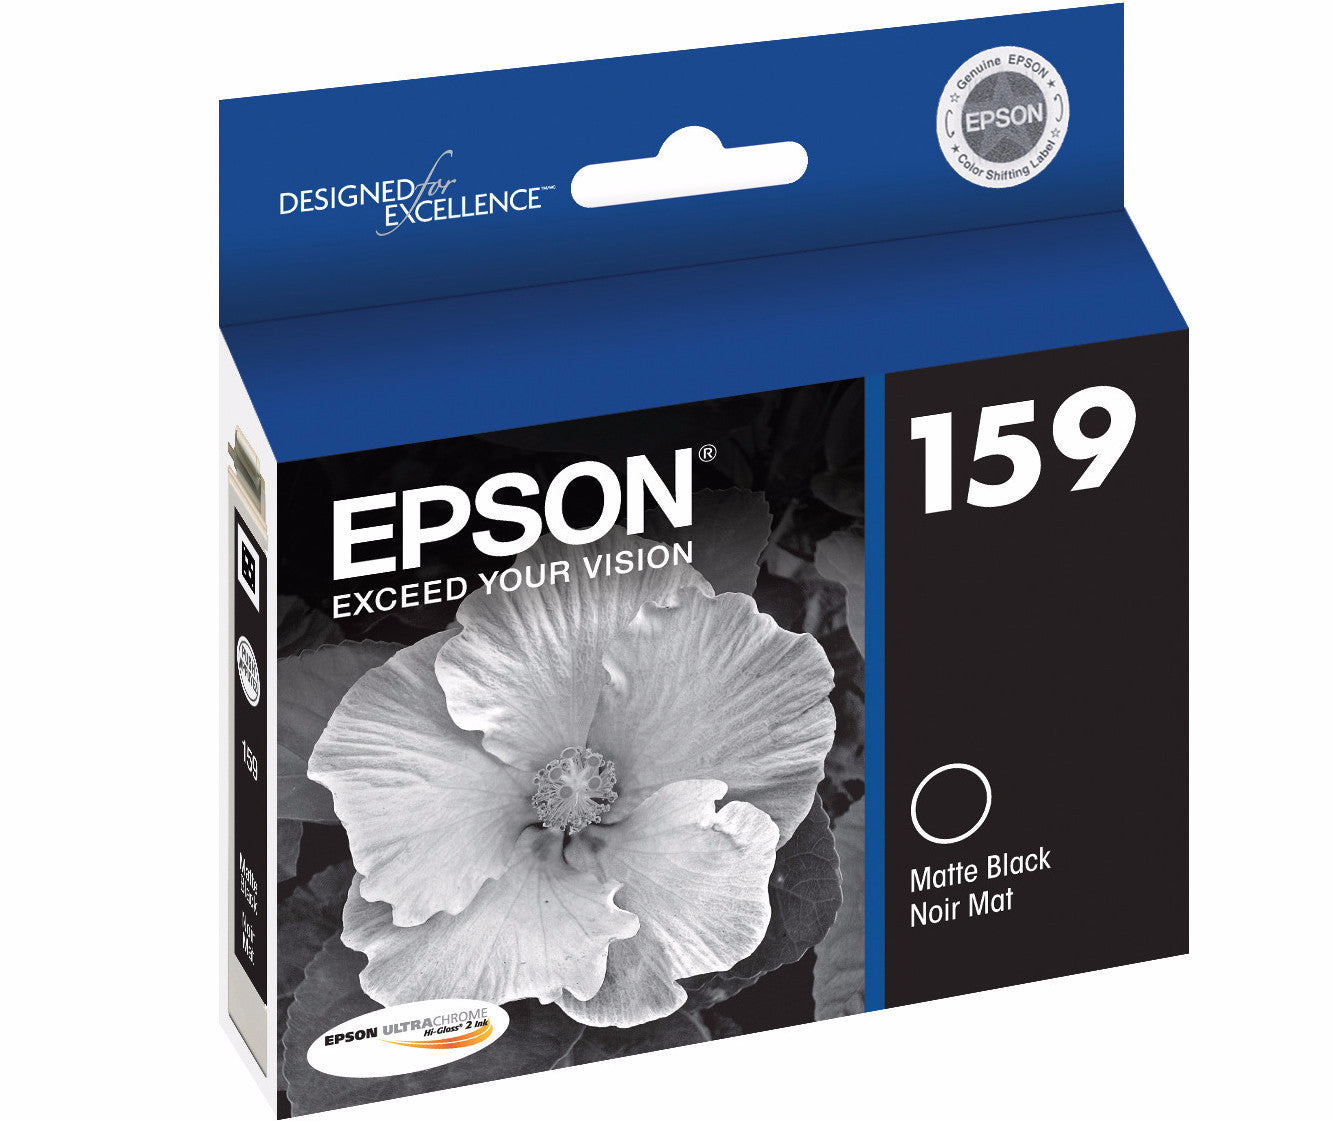 Epson T159820 R2000 Matte Black Ink, printers ink small format, Epson - Pictureline 